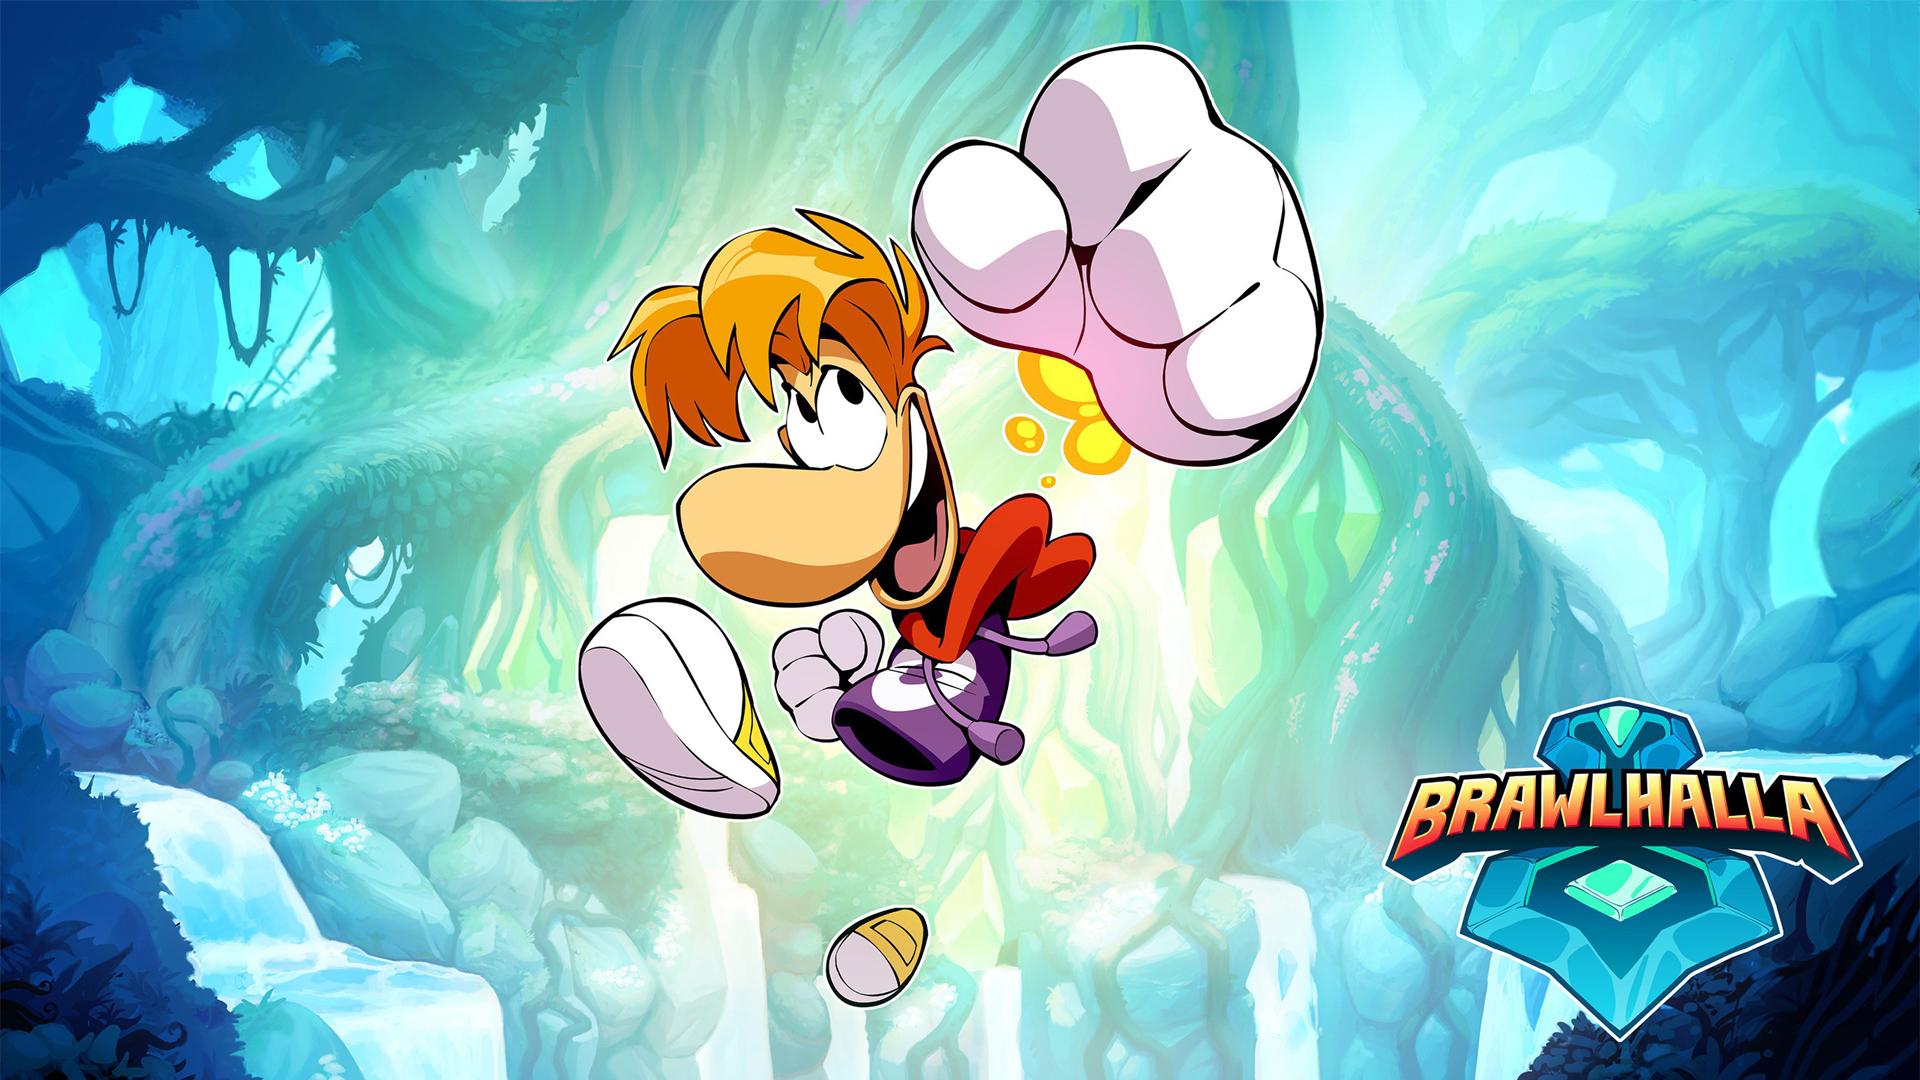 Rayman joins the fight. Wallpaper from Brawlhalla